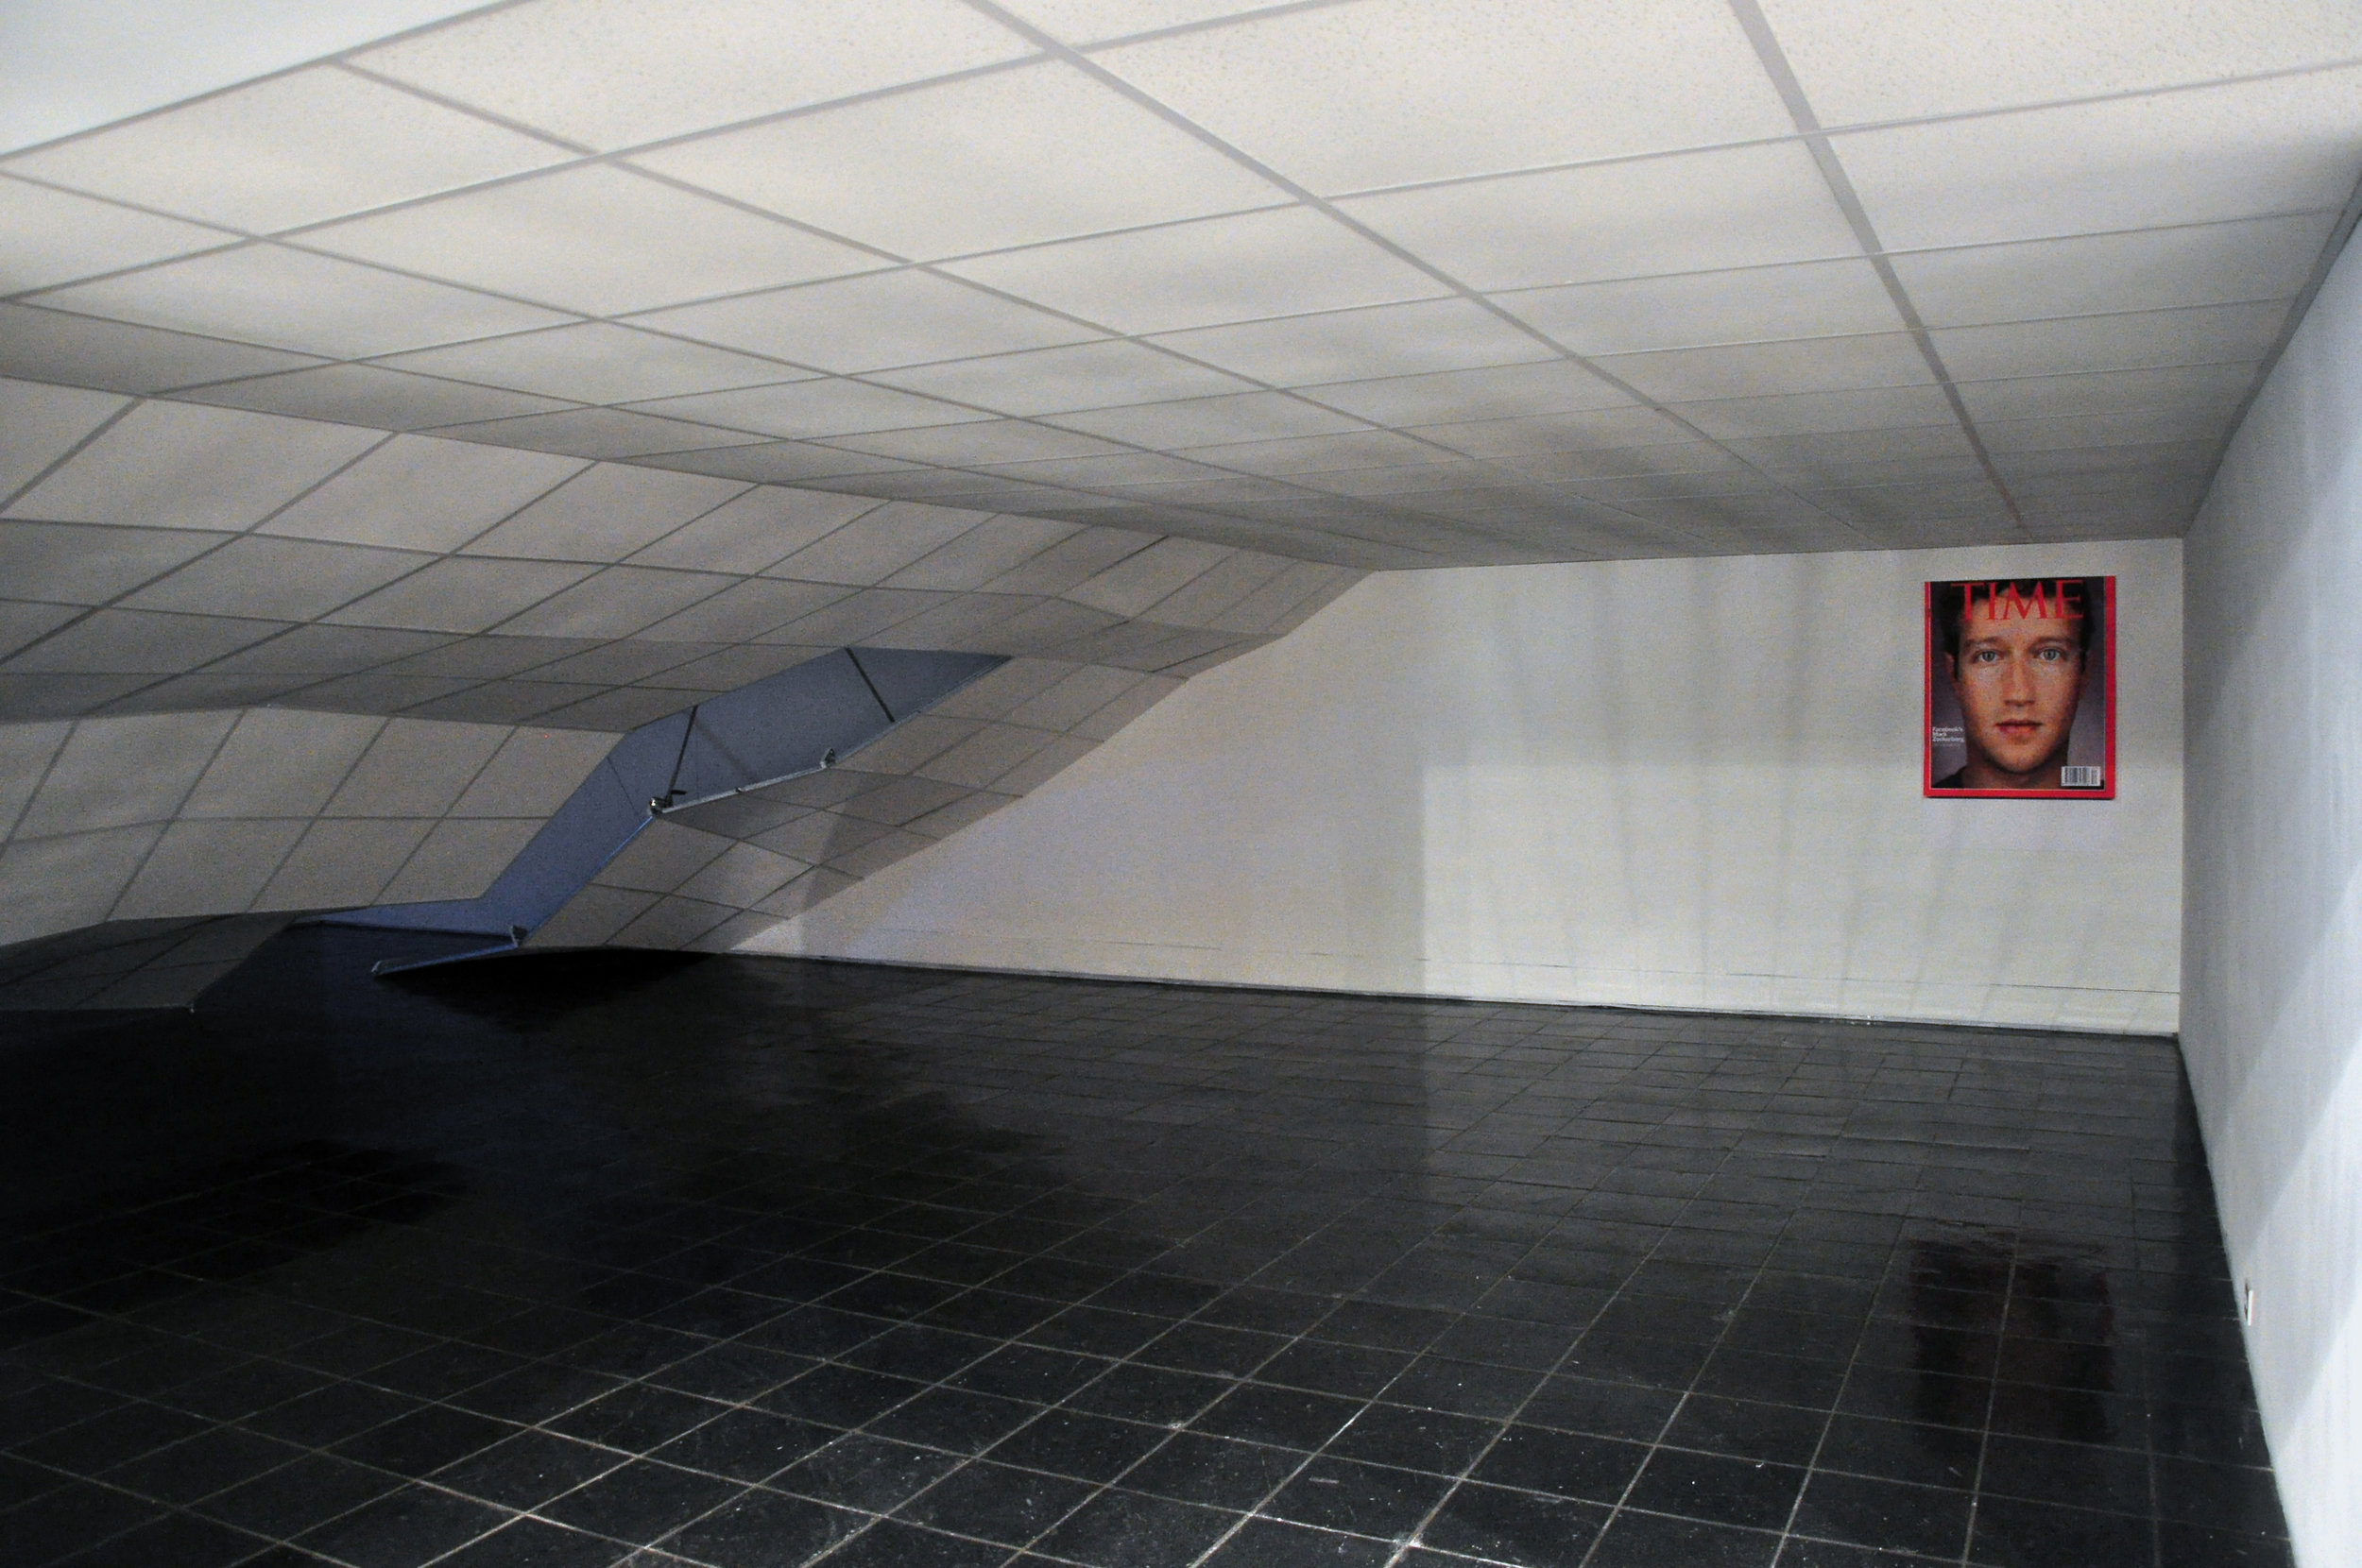  Dennis McNulty,&nbsp; The Crash,  with  FACETIME , 2011, suspended ceiling elements, tiles and ratchet straps; dimensions variable; and poster, 33 x 40 inches. Courtesy of the artist and Green On Red Gallery, Dublin; commissioned by Bureau for Open 